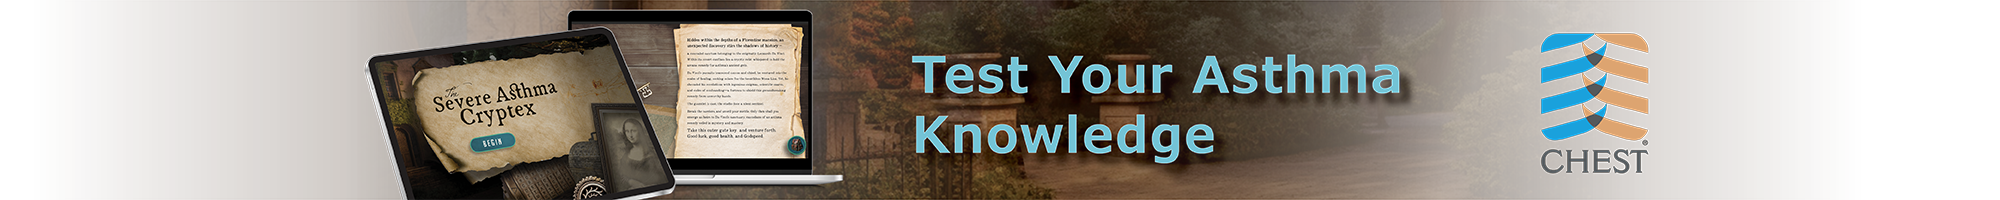 Test Your Asthma Knowledge